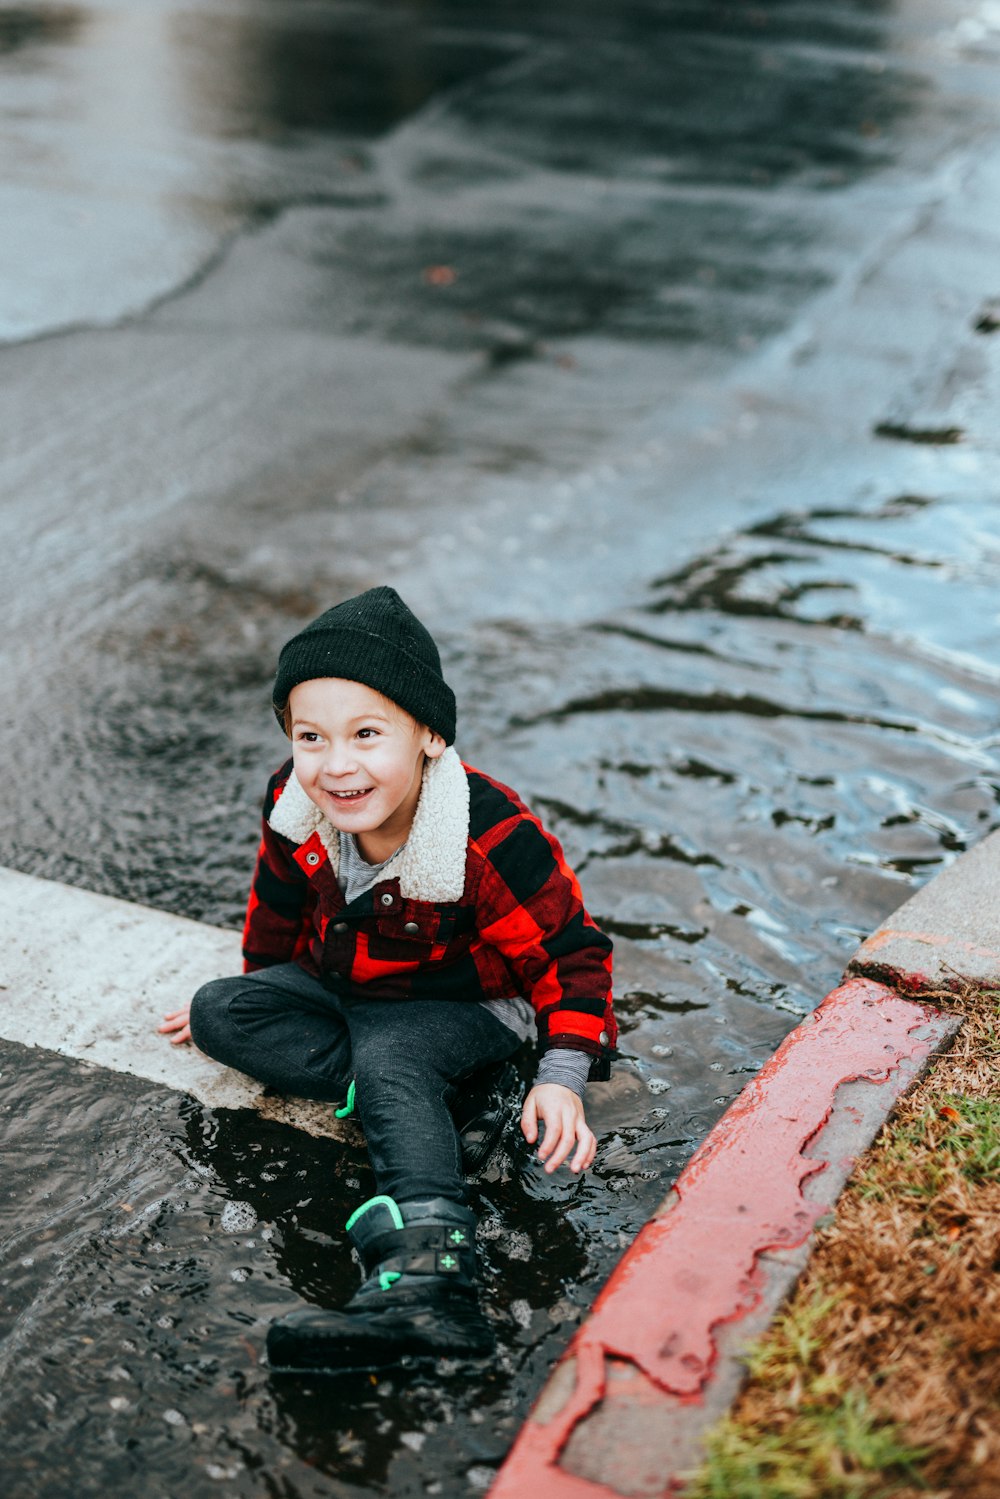 boy in red and black jacket sitting on concrete pavement